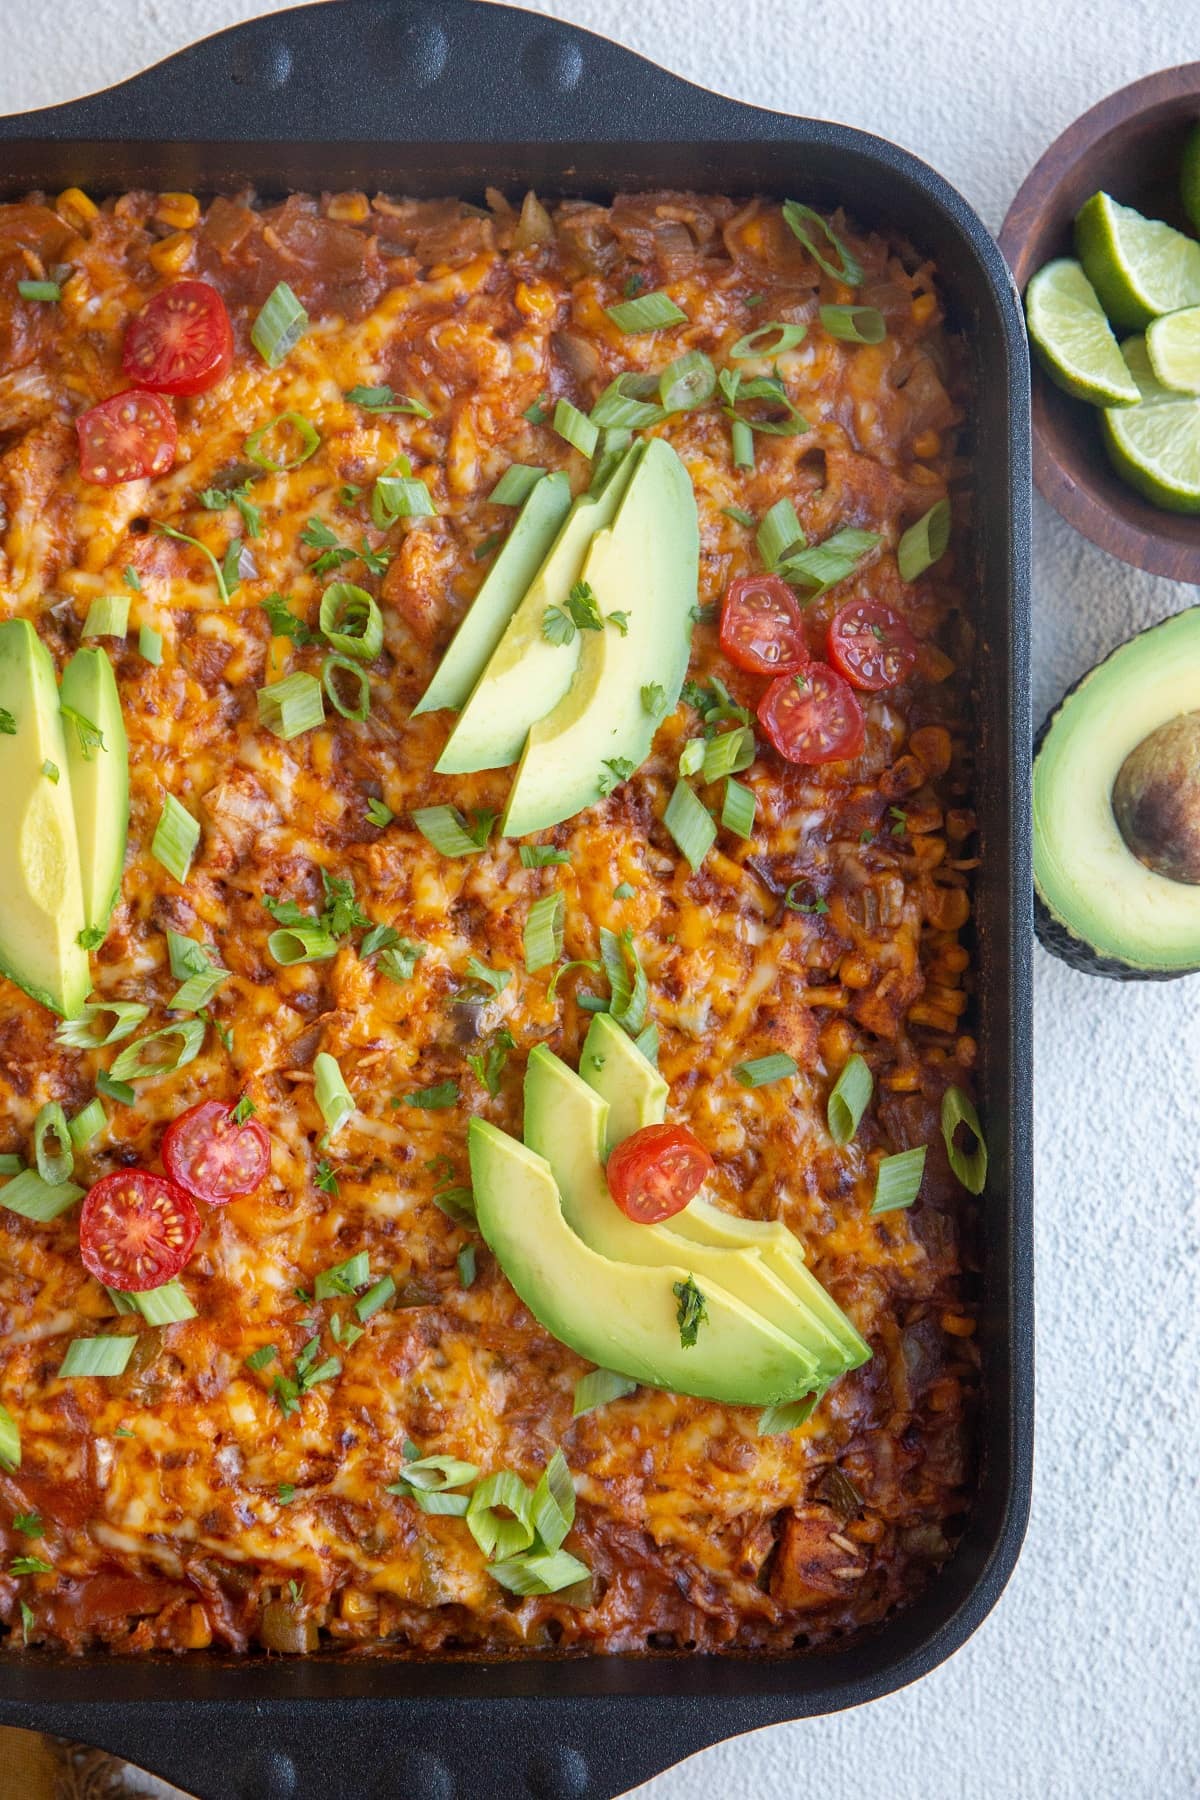 Top down photo of whole enchilada casserole fresh out of the oven with slices of avocado and cherry tomatoes on top.